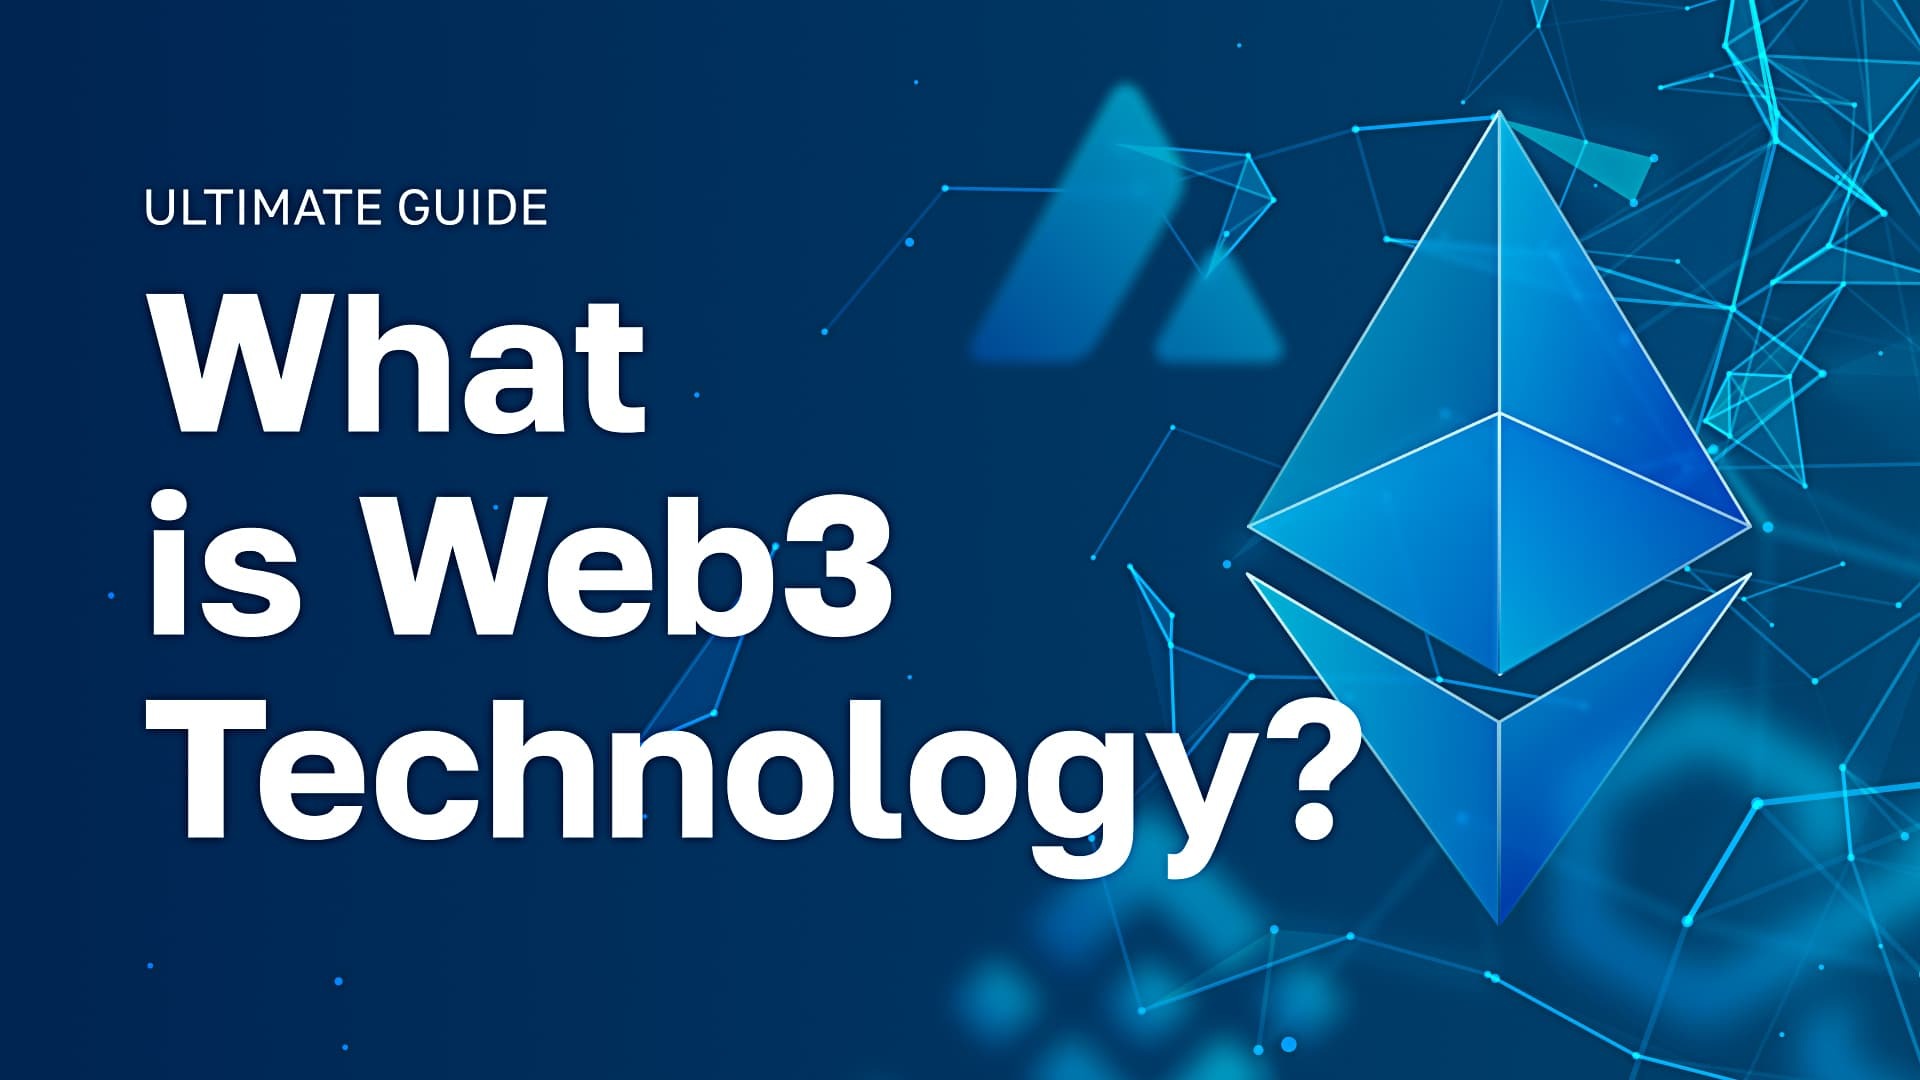 Ultimate Guide: What is Web3 Technology?